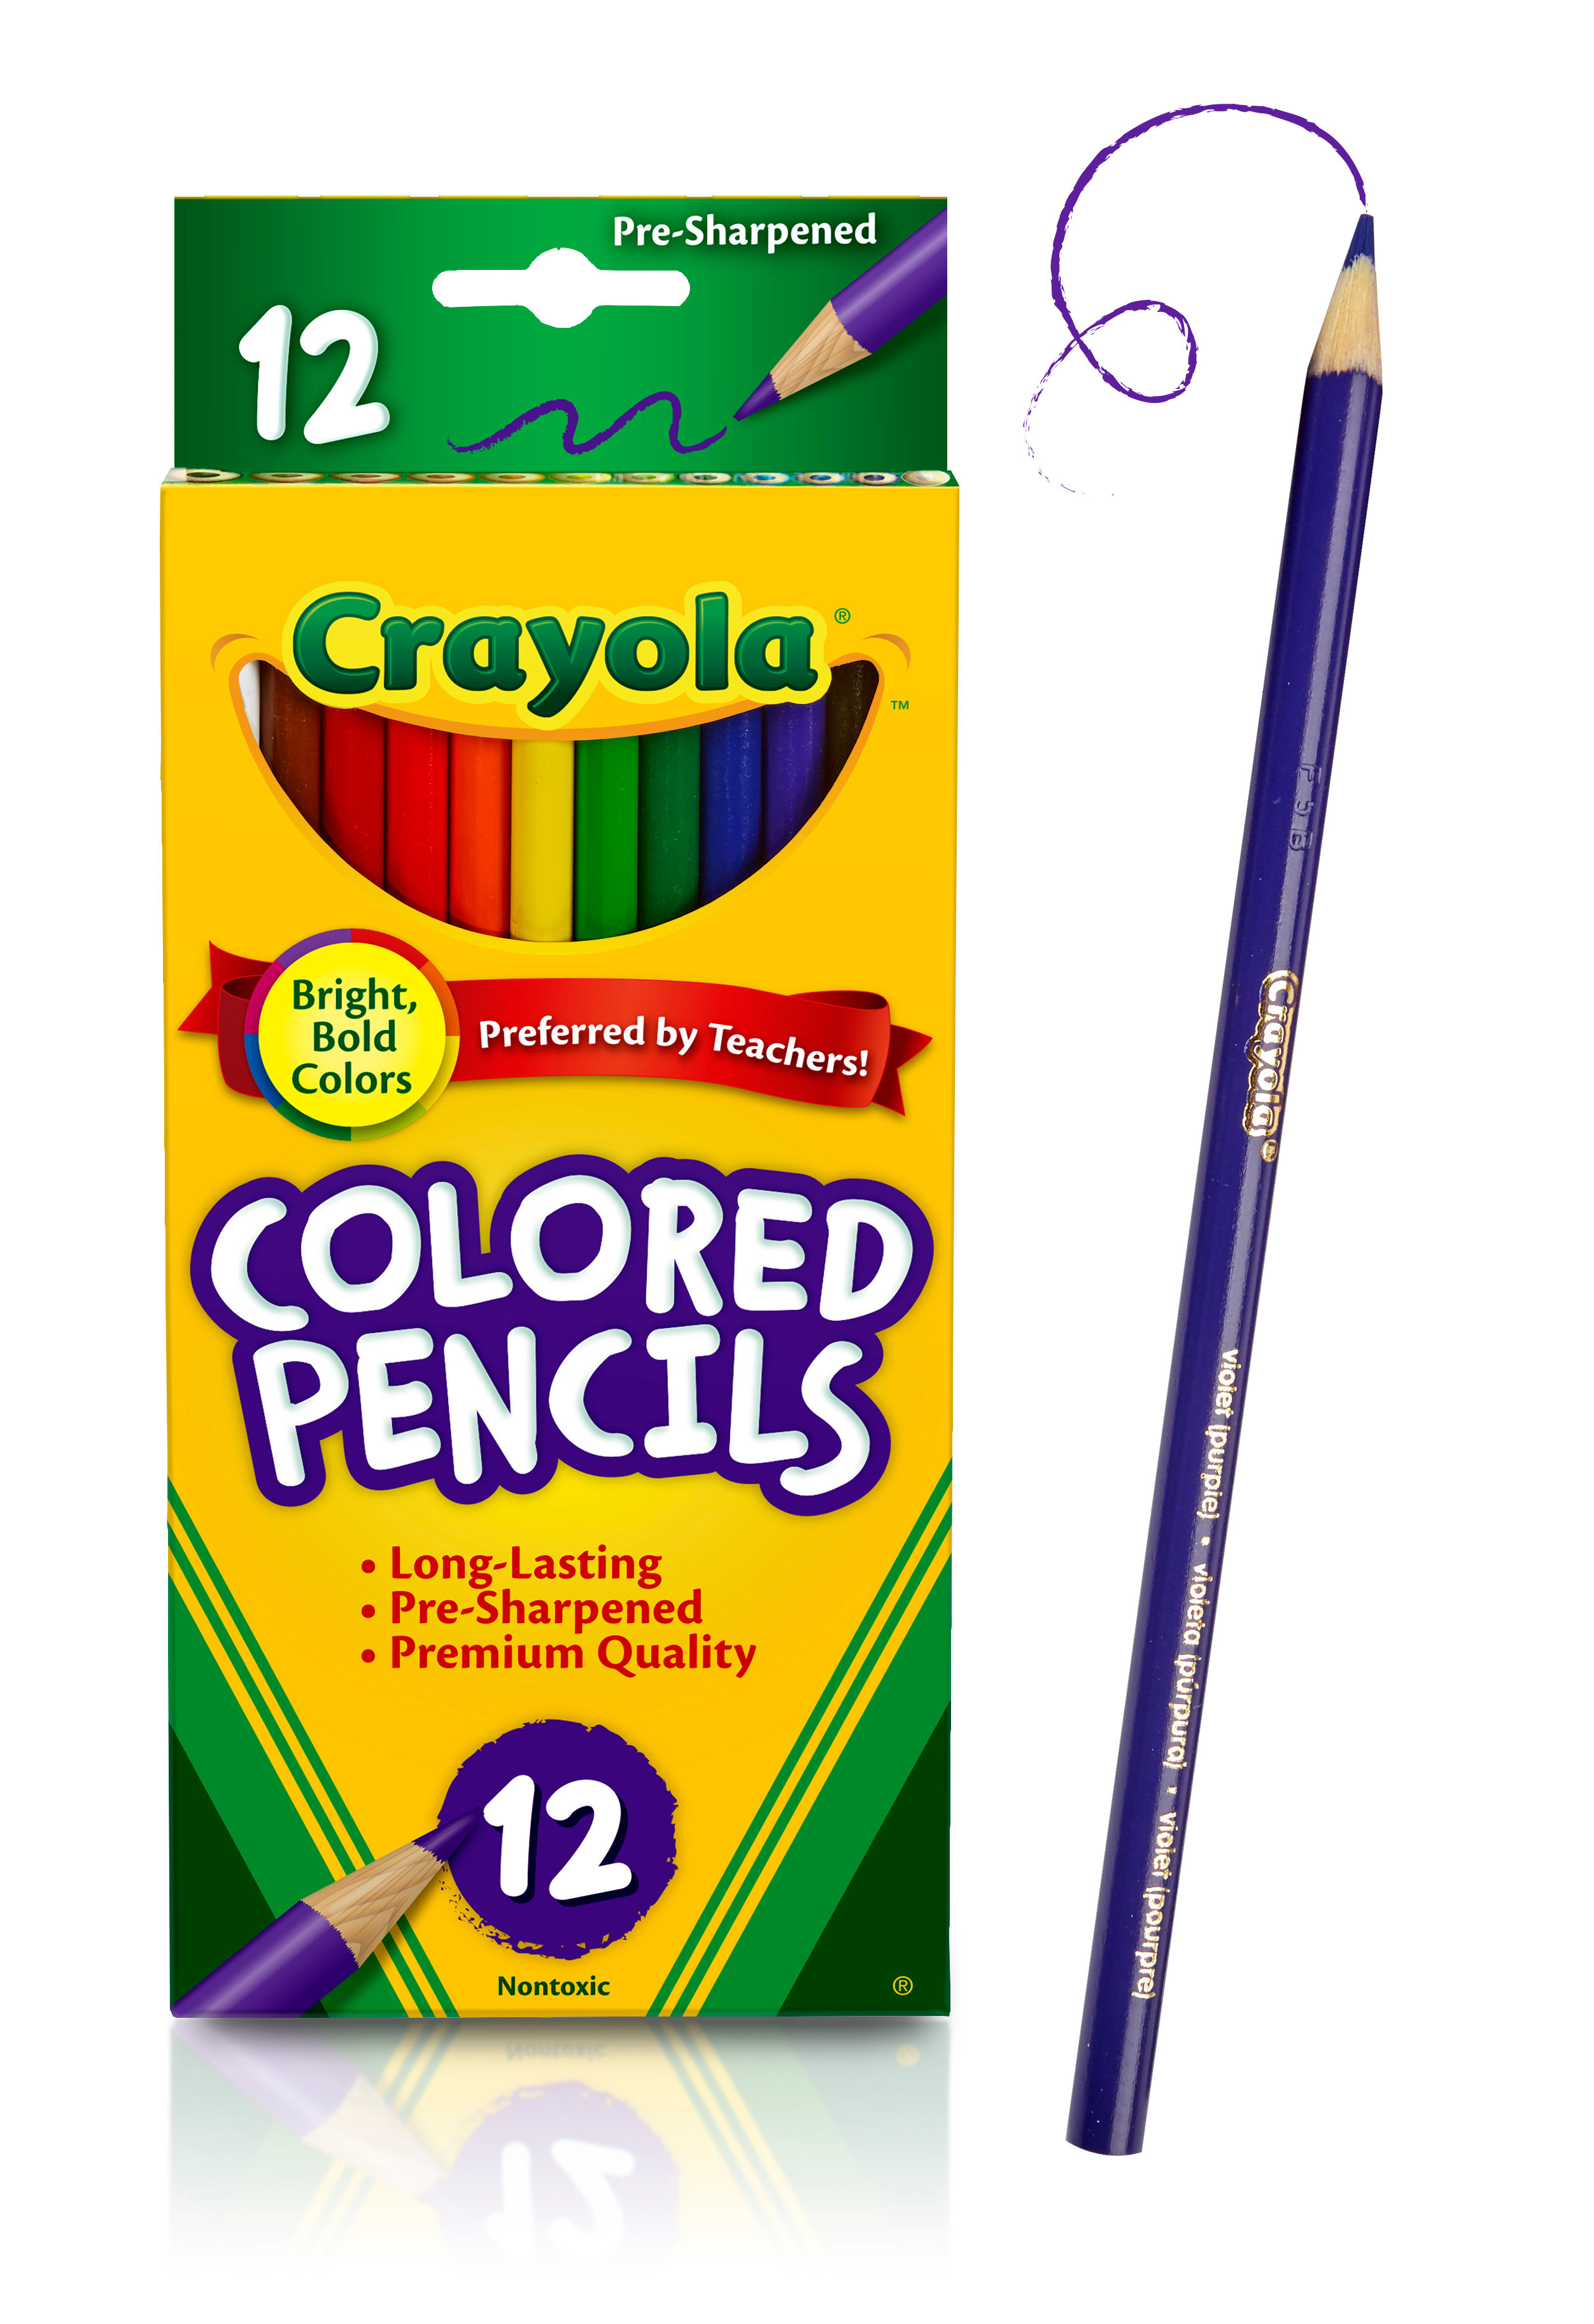 Crayola Colored Pencils, Assorted Colors, Pre-sharpened, Adult Coloring, 12 Count - image 4 of 9